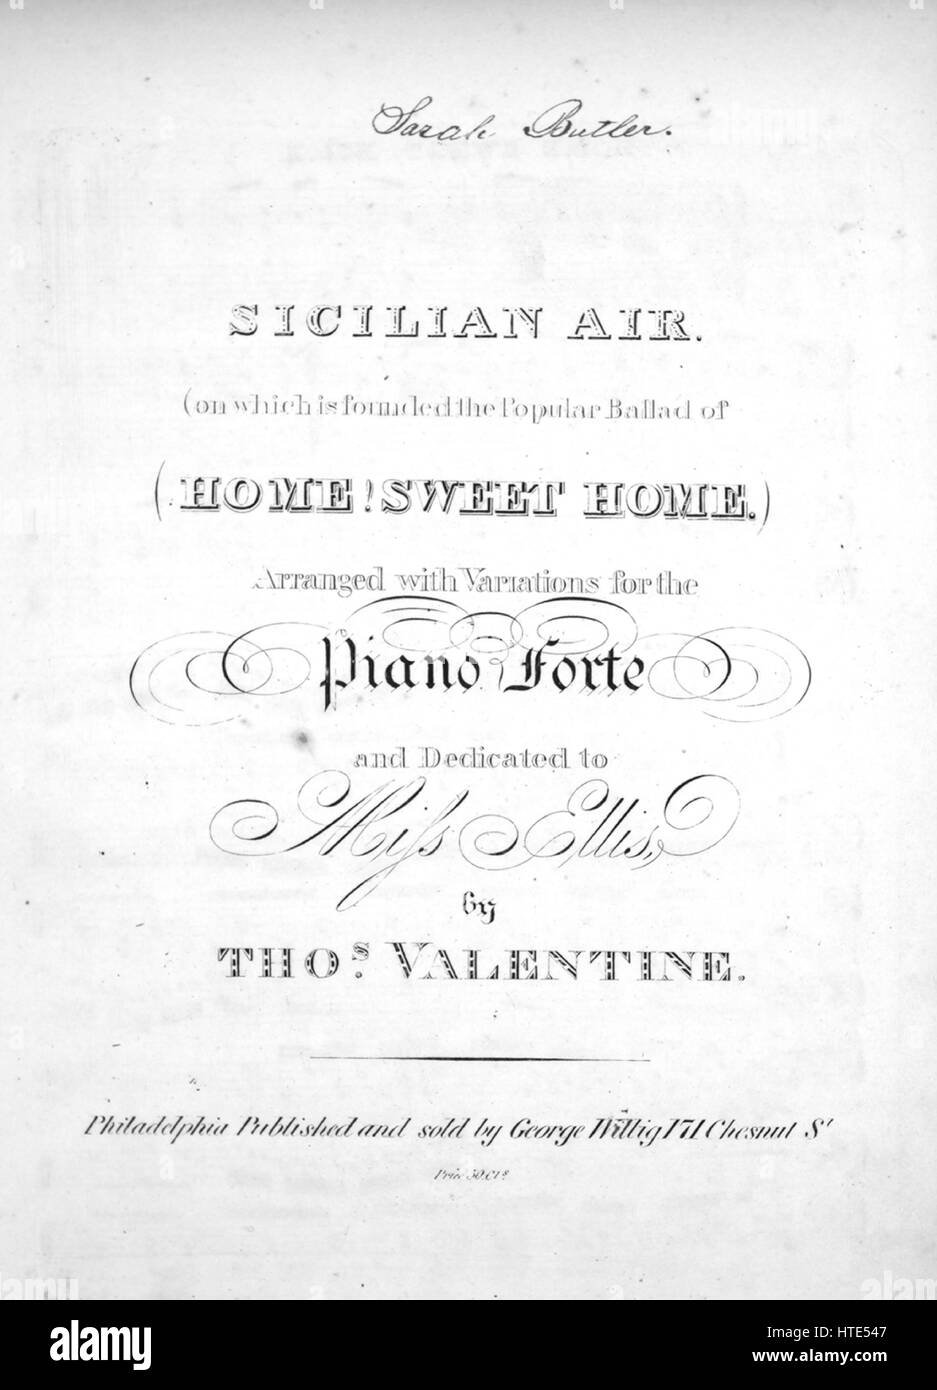 Sheet music cover image of the song 'Sicilian Air (on which if founded the Popular Ballad of Home! Sweet Home)', with original authorship notes reading 'Arranged with Variations for the Piano Forte by Thos Valentine', United States, 1900. The publisher is listed as 'George Willig, 171 Chesnut St.', the form of composition is 'theme and variation', the instrumentation is 'piano', the first line reads 'None', and the illustration artist is listed as 'None'. Stock Photo